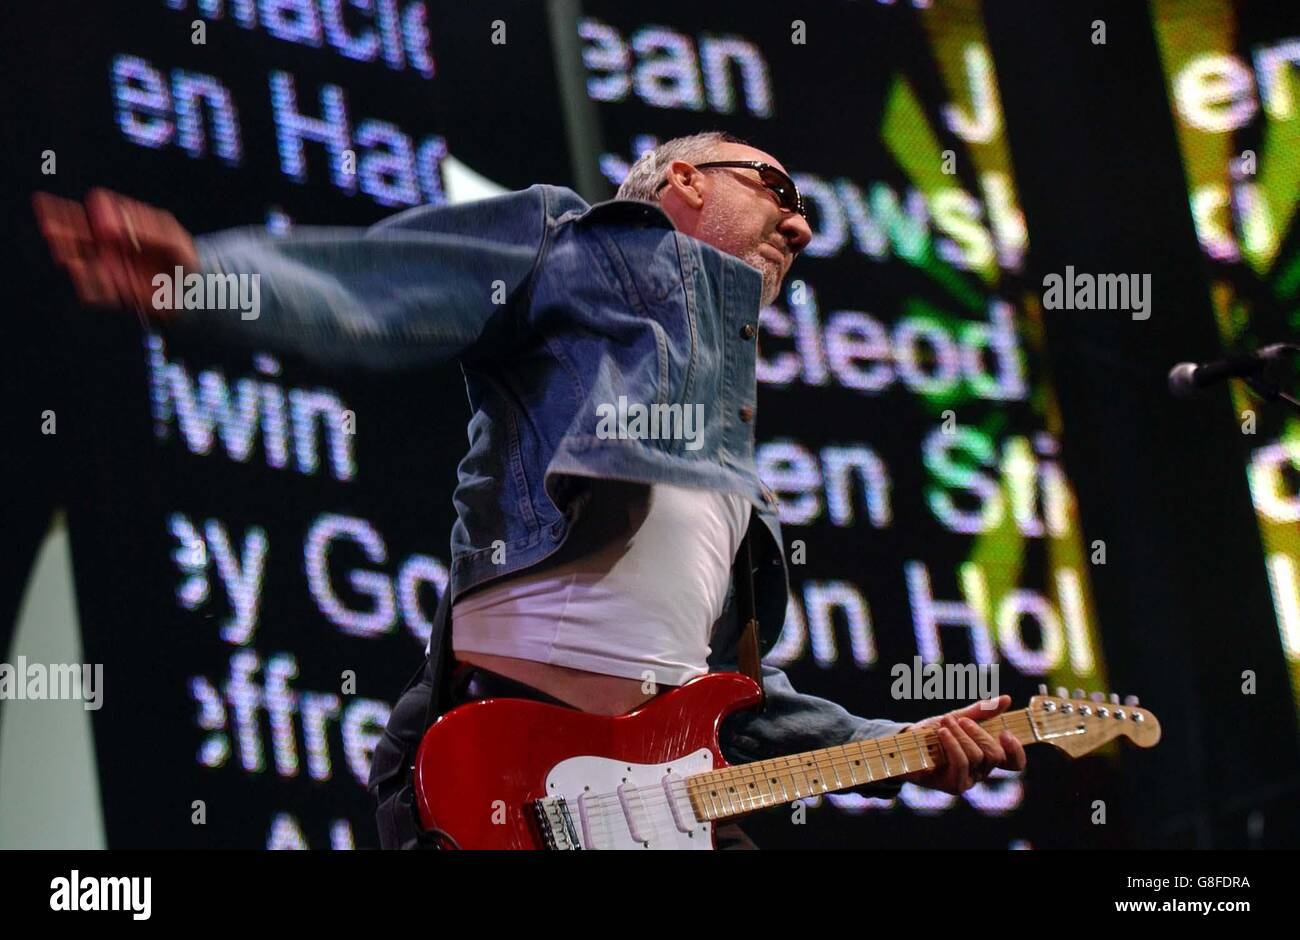 Live 8 Concert - Hyde Park. Pete Townshend of The Who performs on stage. Stock Photo